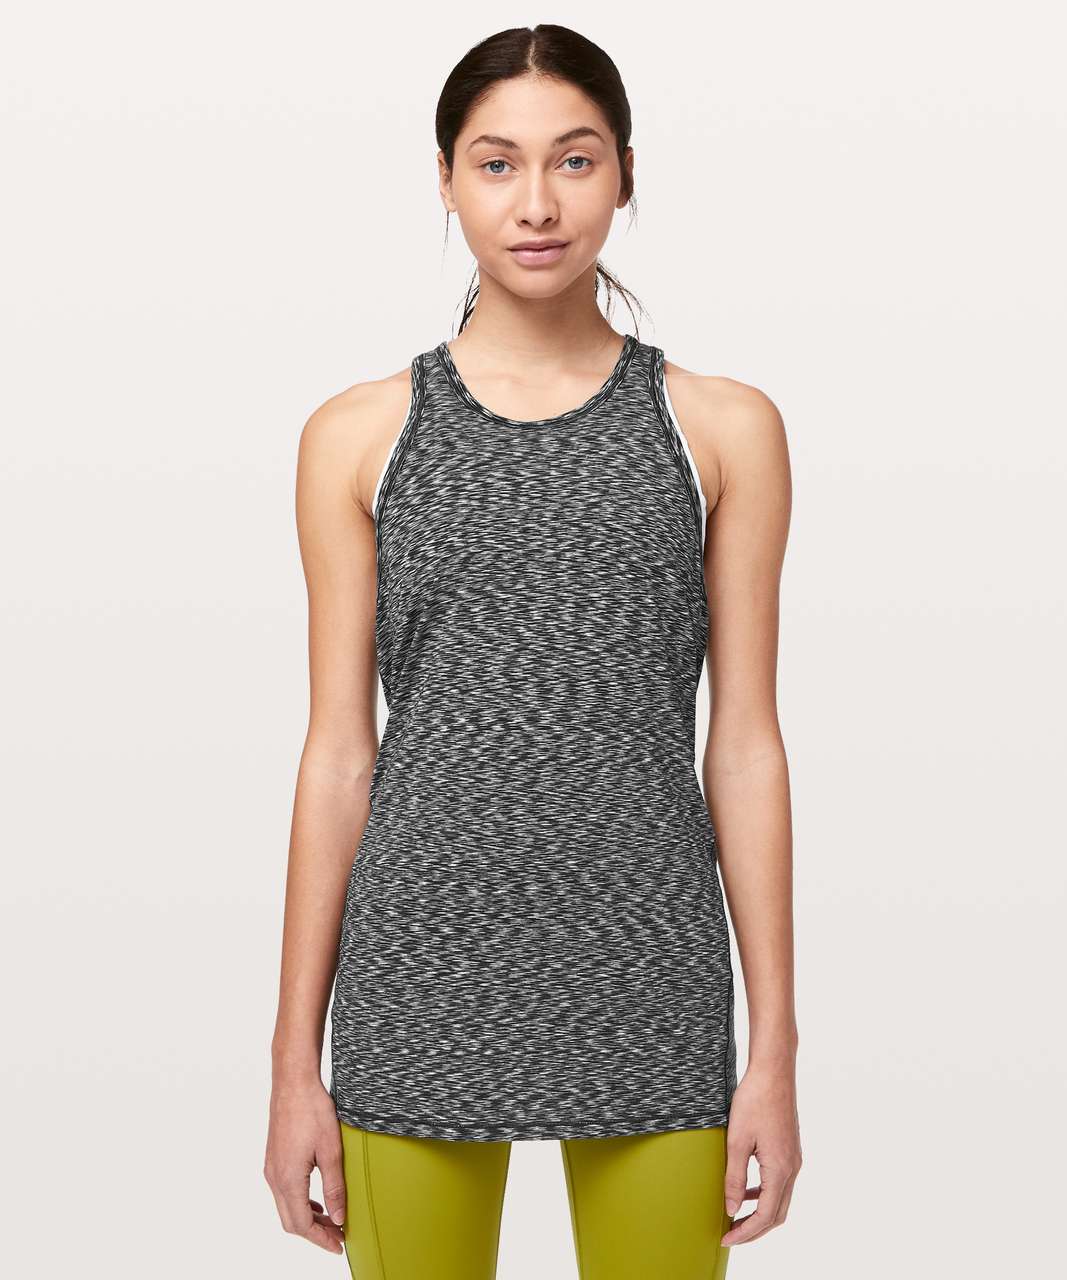 Lululemon Goal Up Tank - Spaced Out 